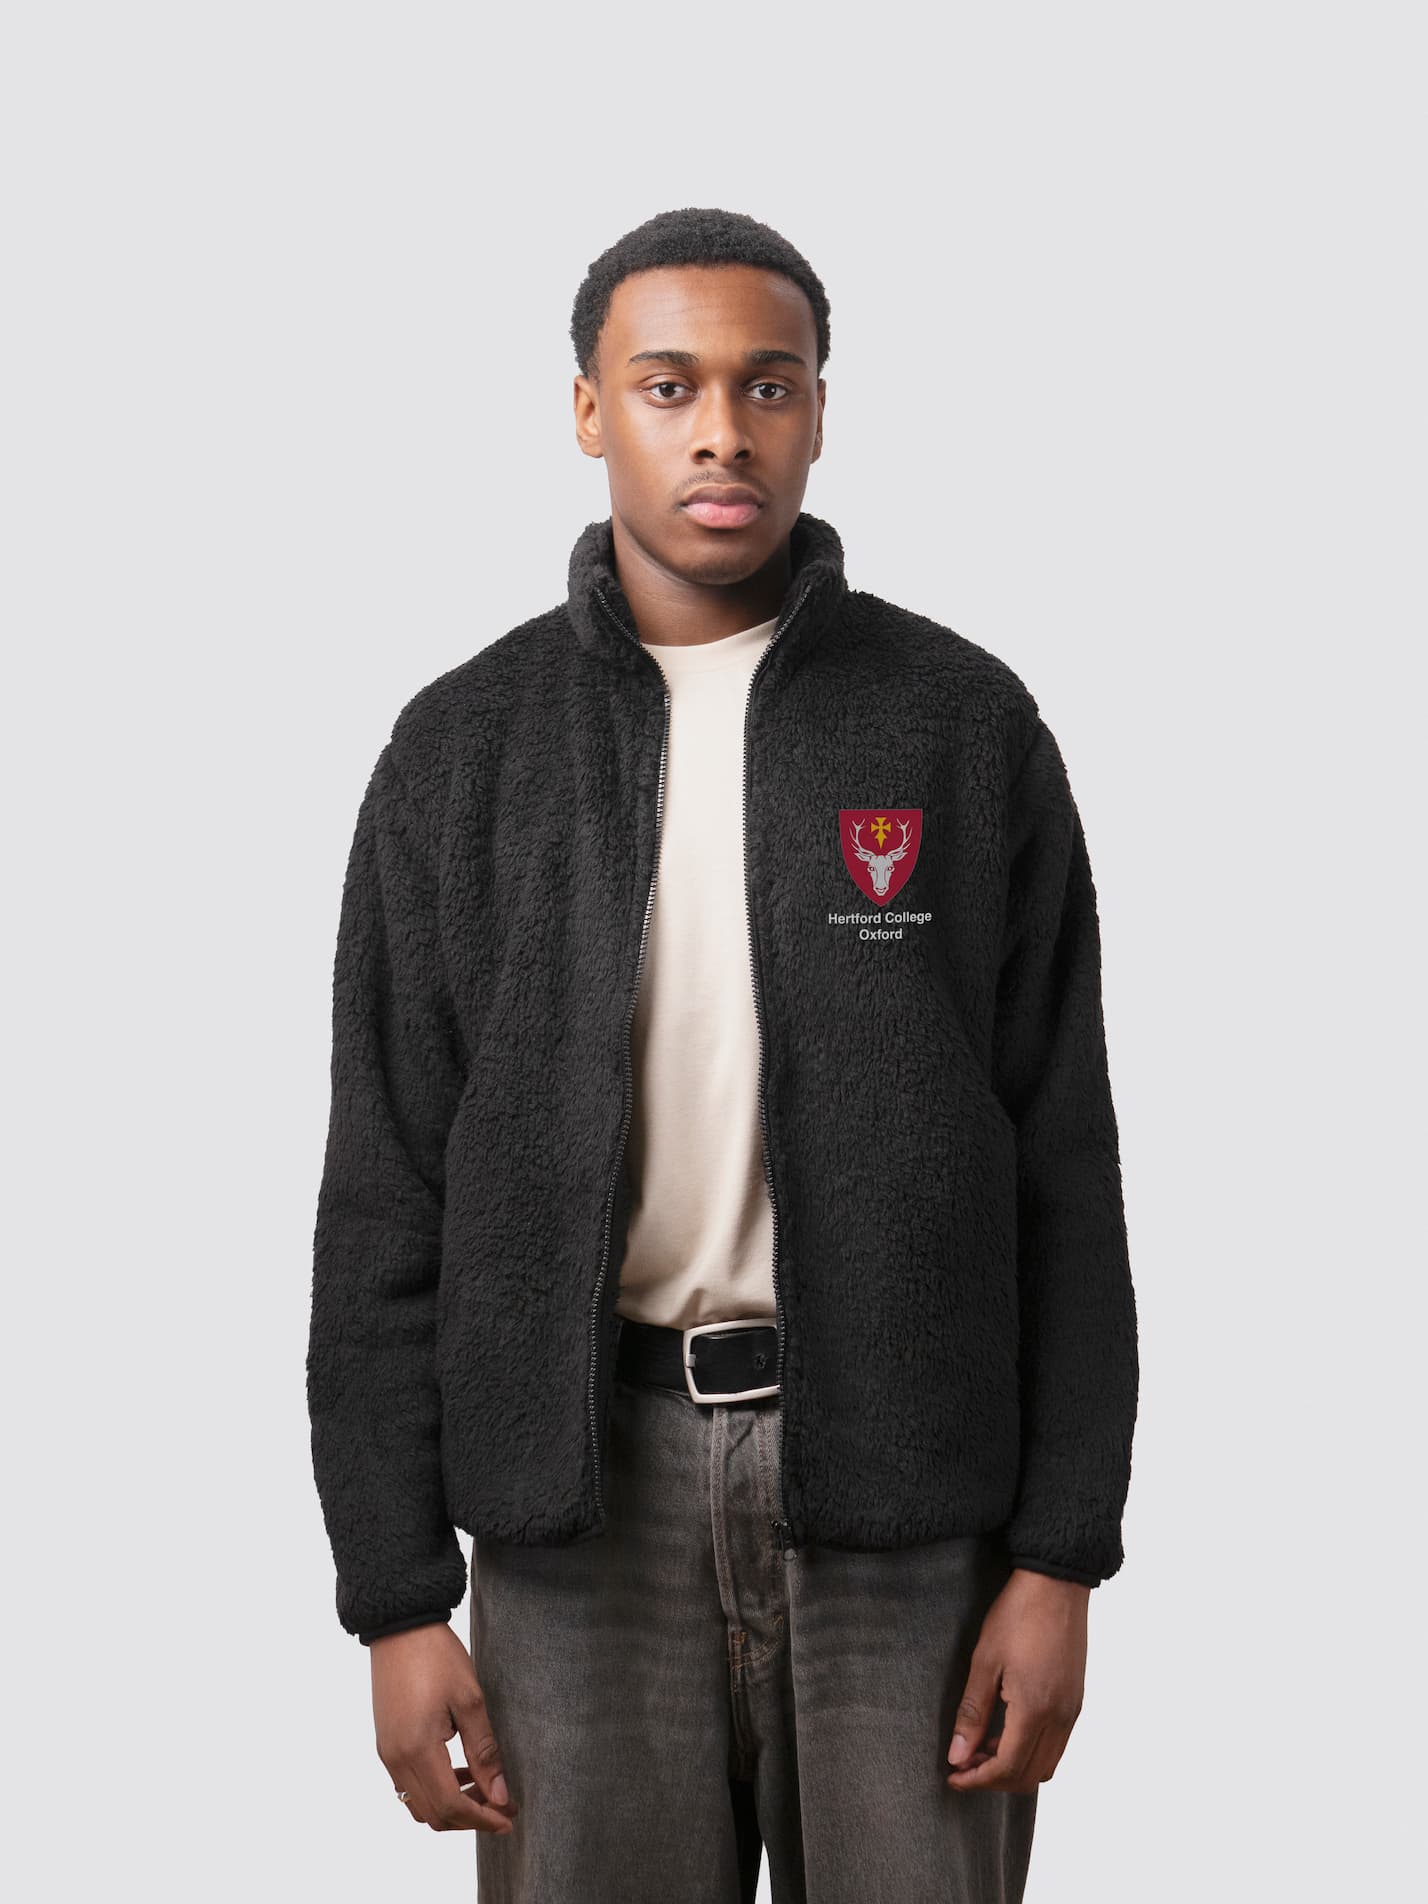 Fluffy black full zip sherpa fleece, with embroidered college crest on the left chest